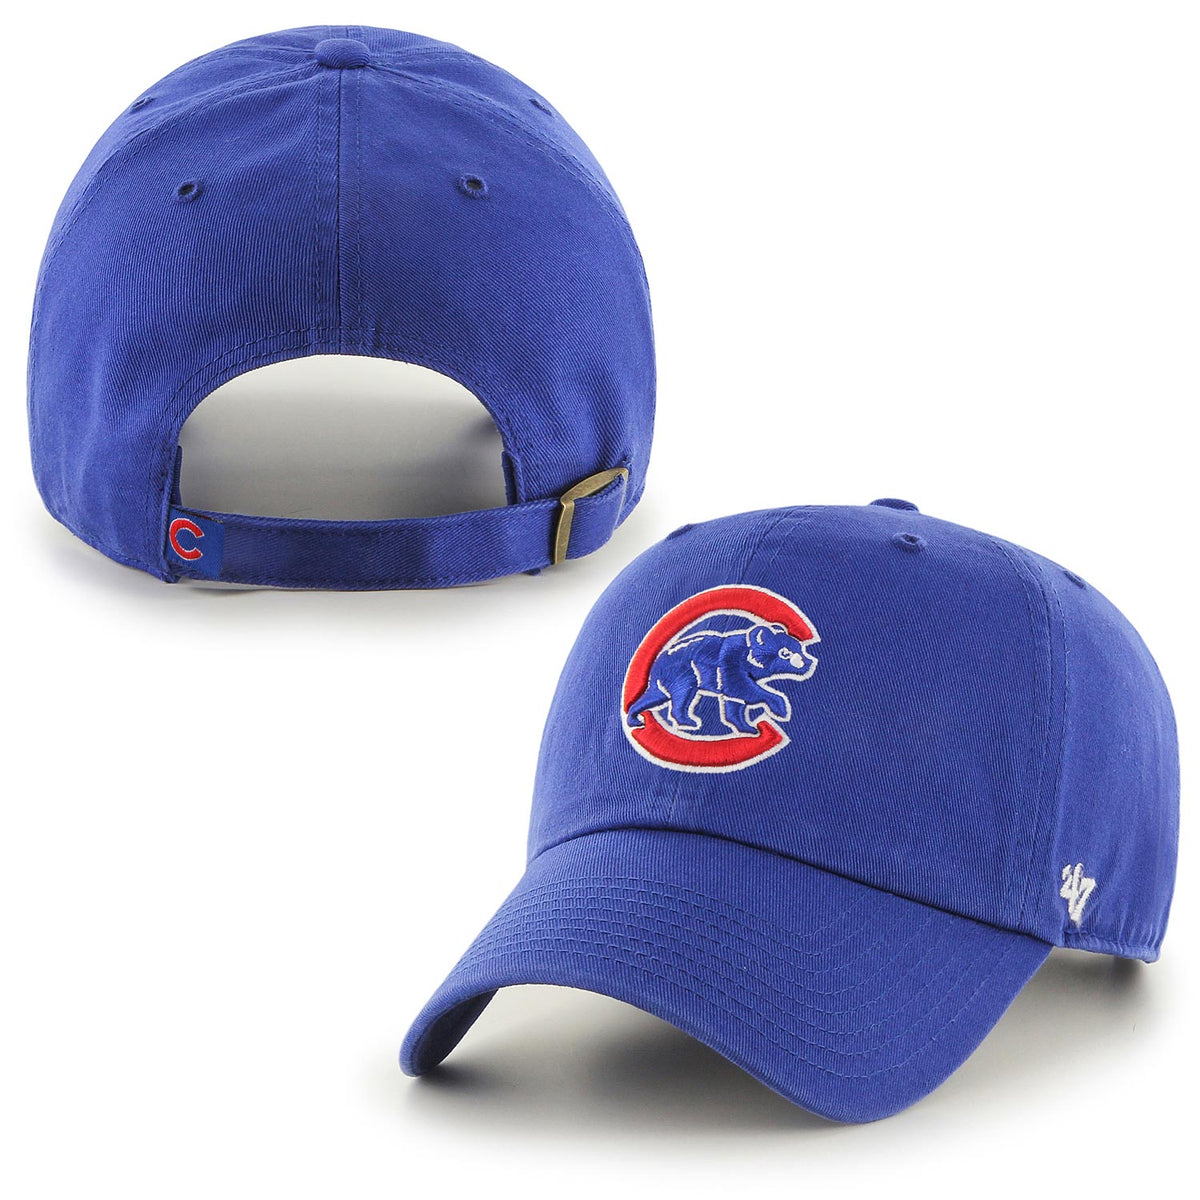 MLB Chicago Cubs Clean Up Cap/Hat by Fan Favorite